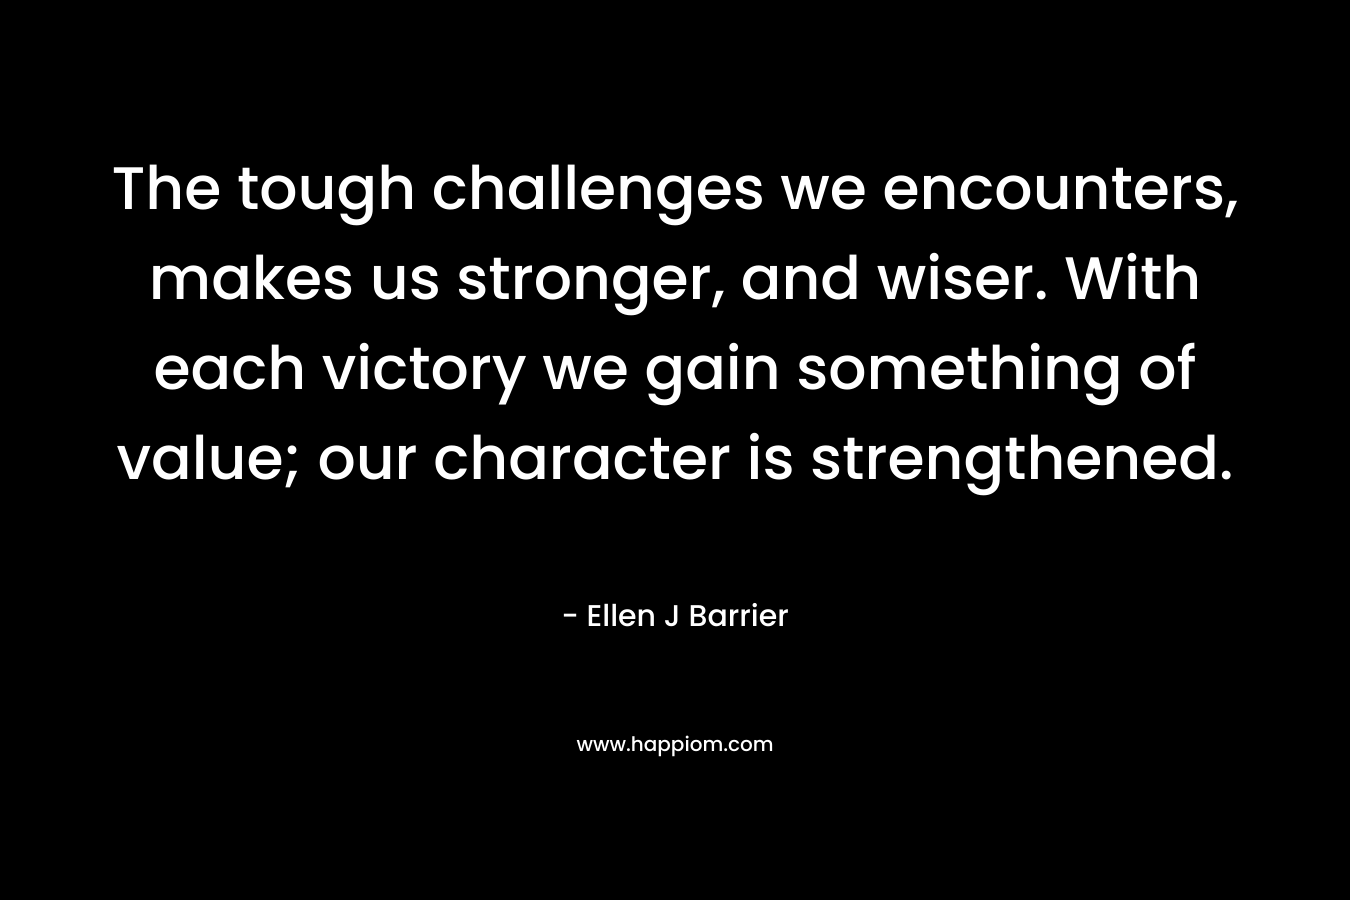 The tough challenges we encounters, makes us stronger, and wiser. With each victory we gain something of value; our character is strengthened.